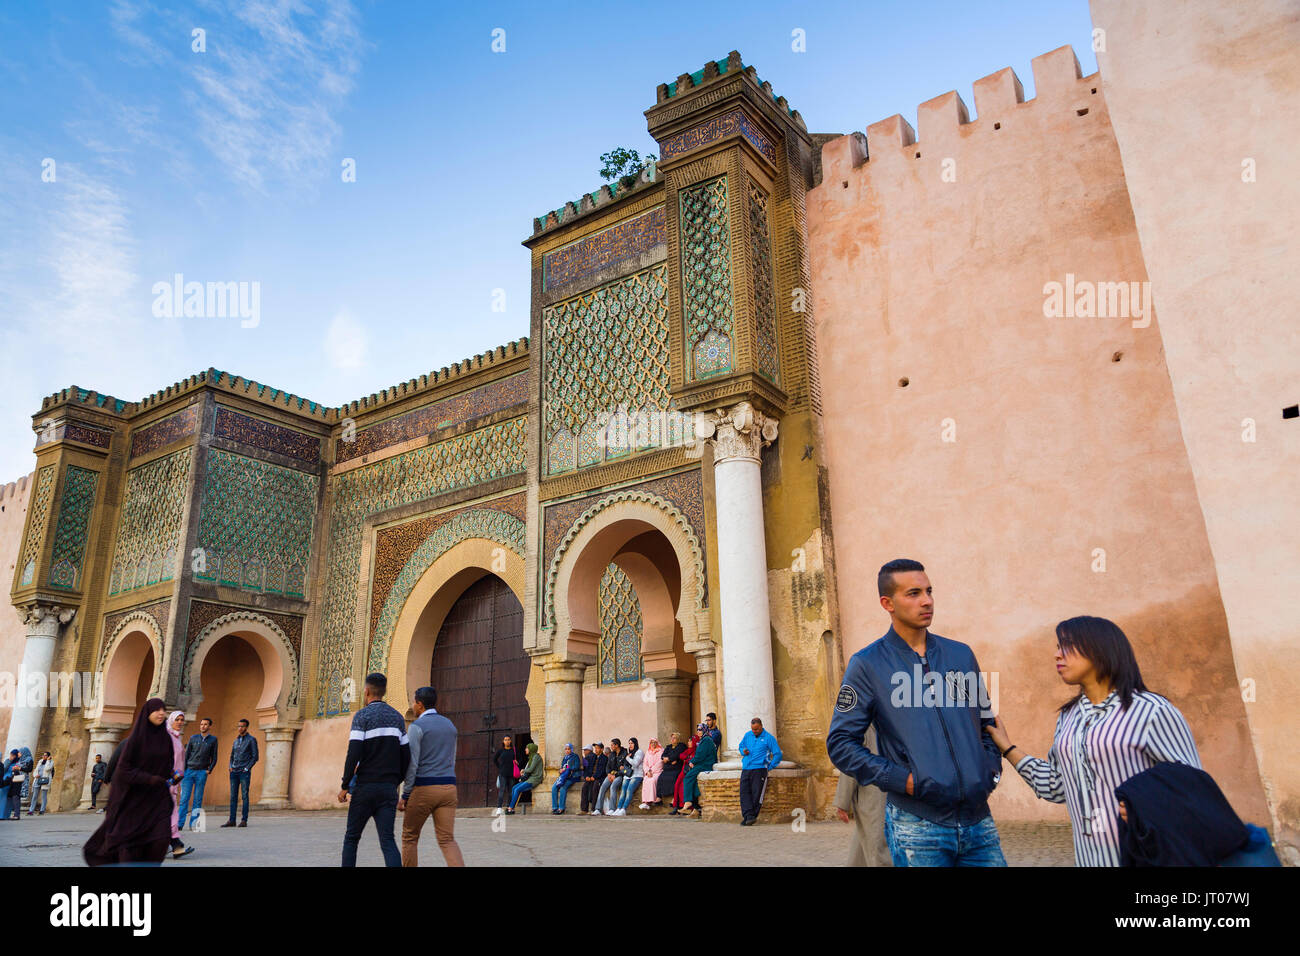 Street life scene. La Bab Mansour or Bab Masour el-Aleuj door, Lahdim Square. Old Imperial City Gate built in 1732 by Moulay Abdallah, Meknes. Morocco Stock Photo